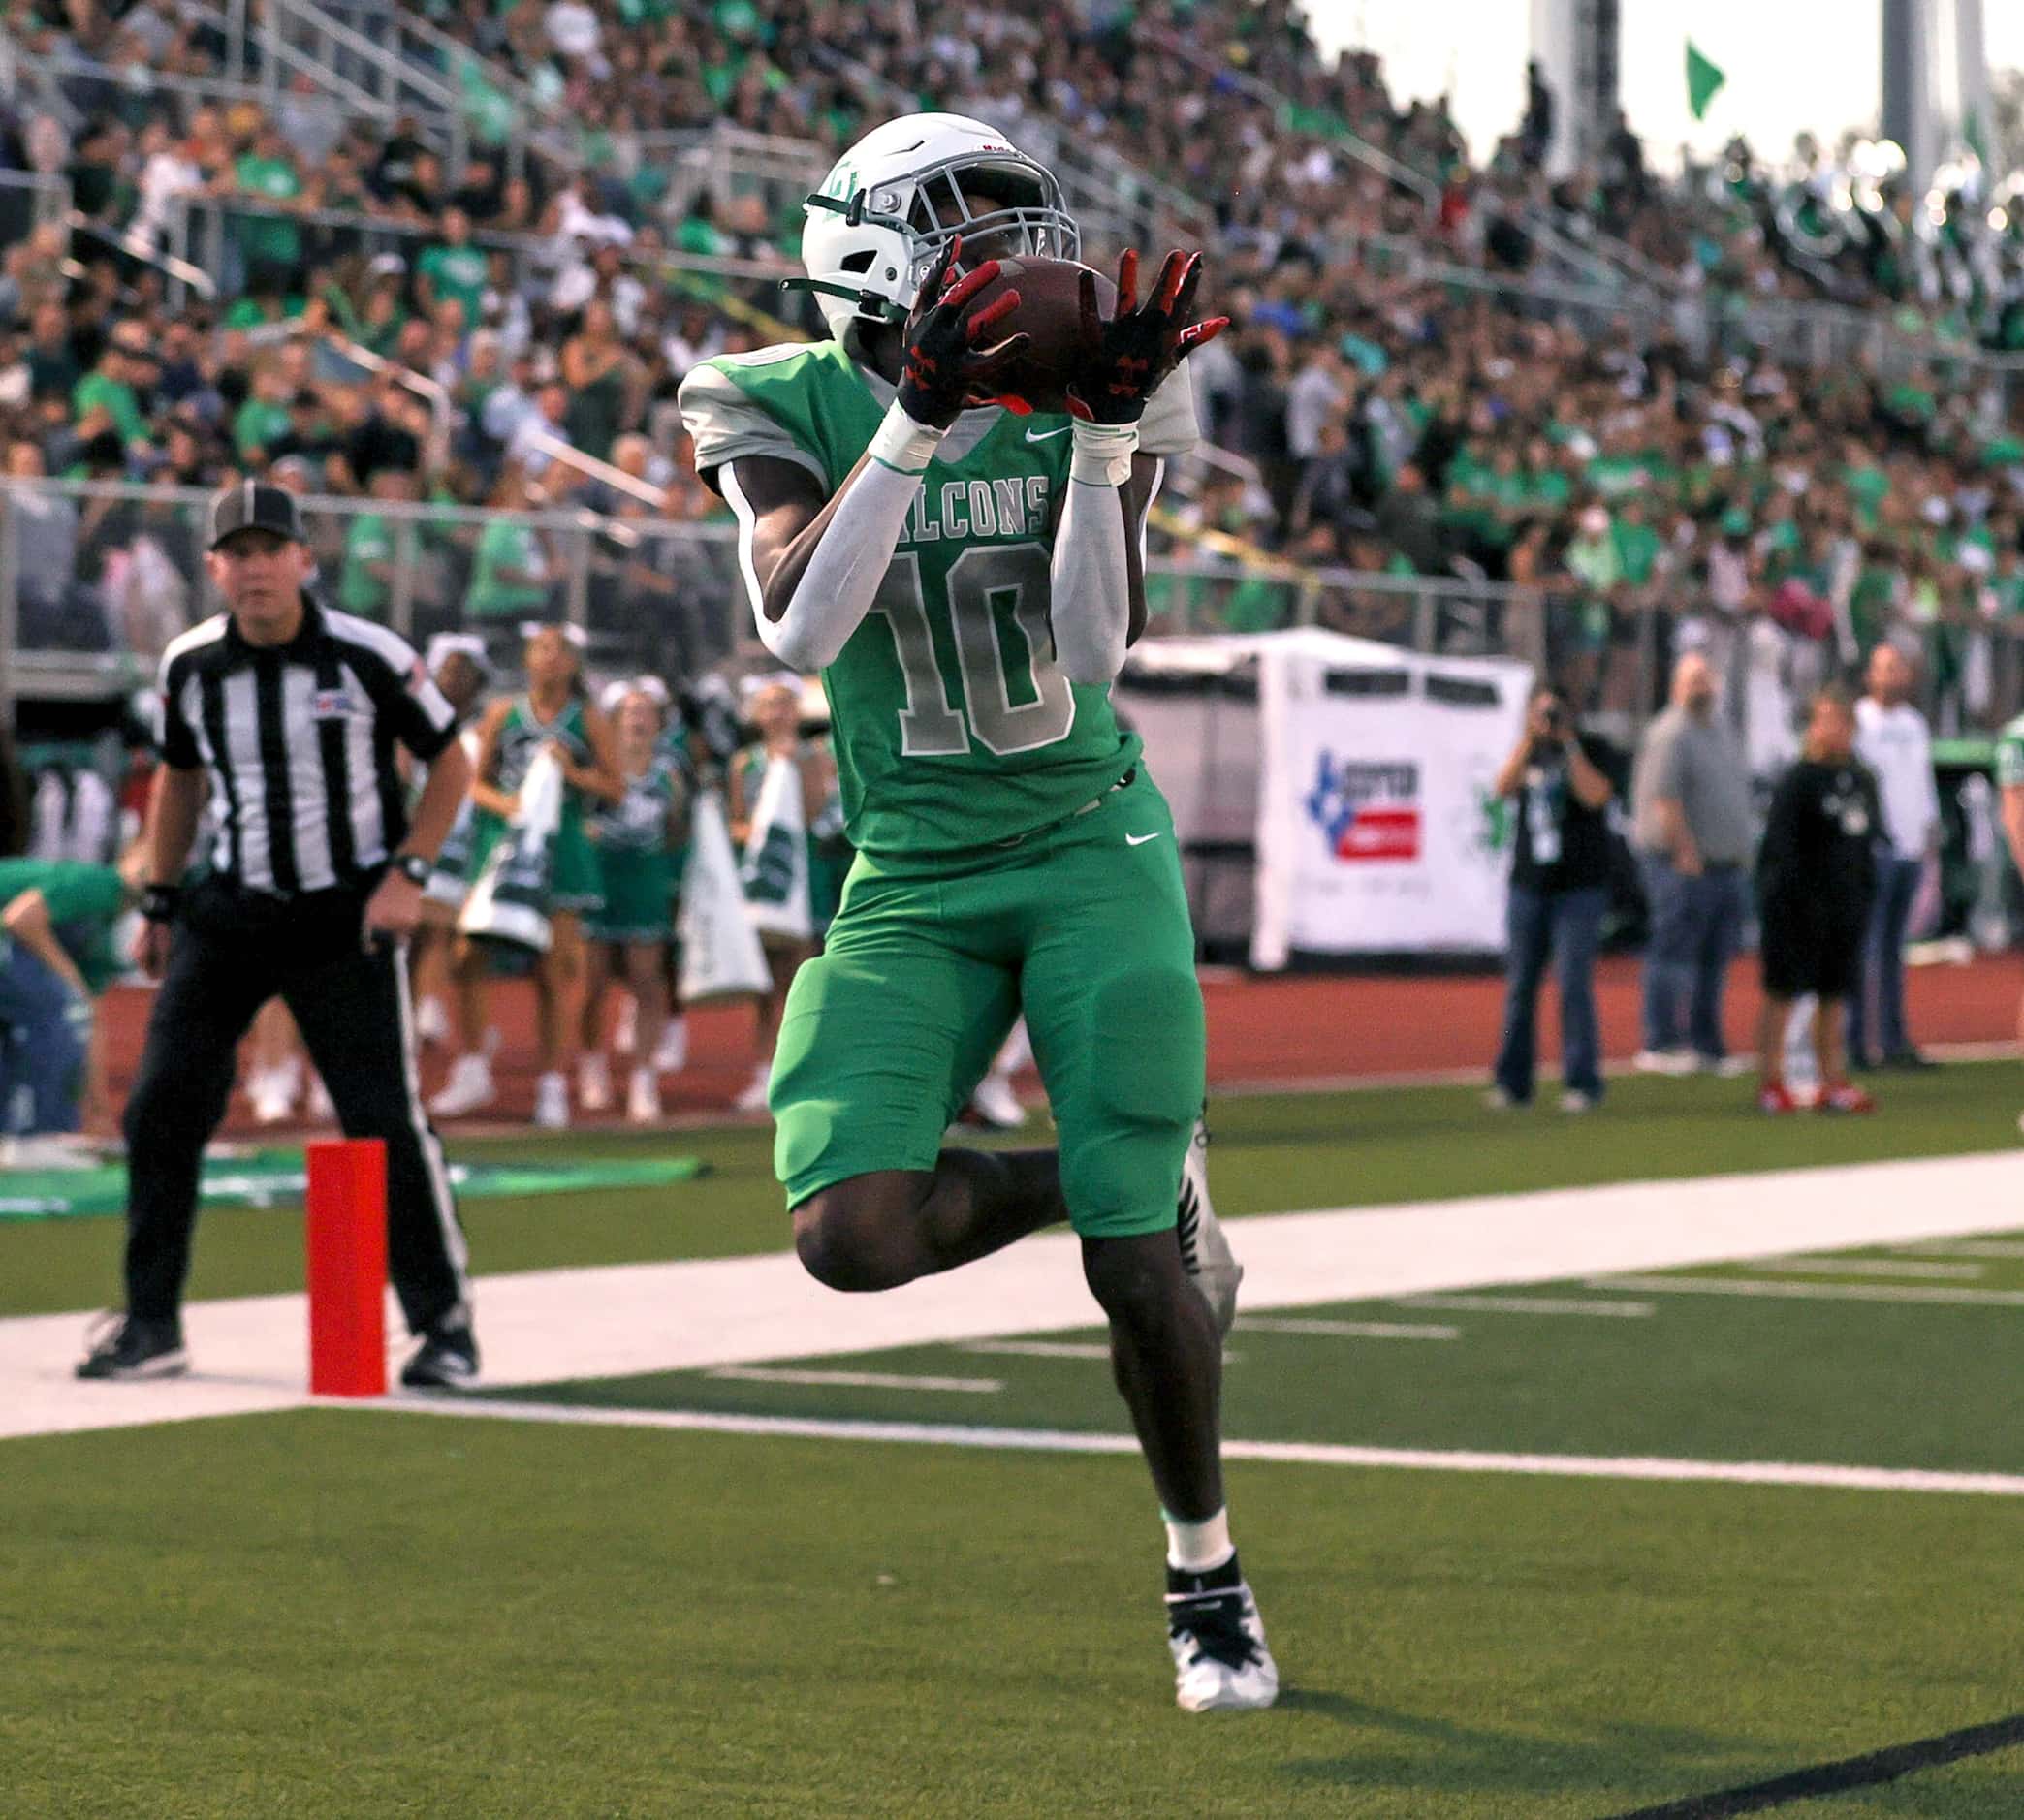 Lake Dallas wide receiver Keonde Henry comes up with a touchdown reception against Frisco...